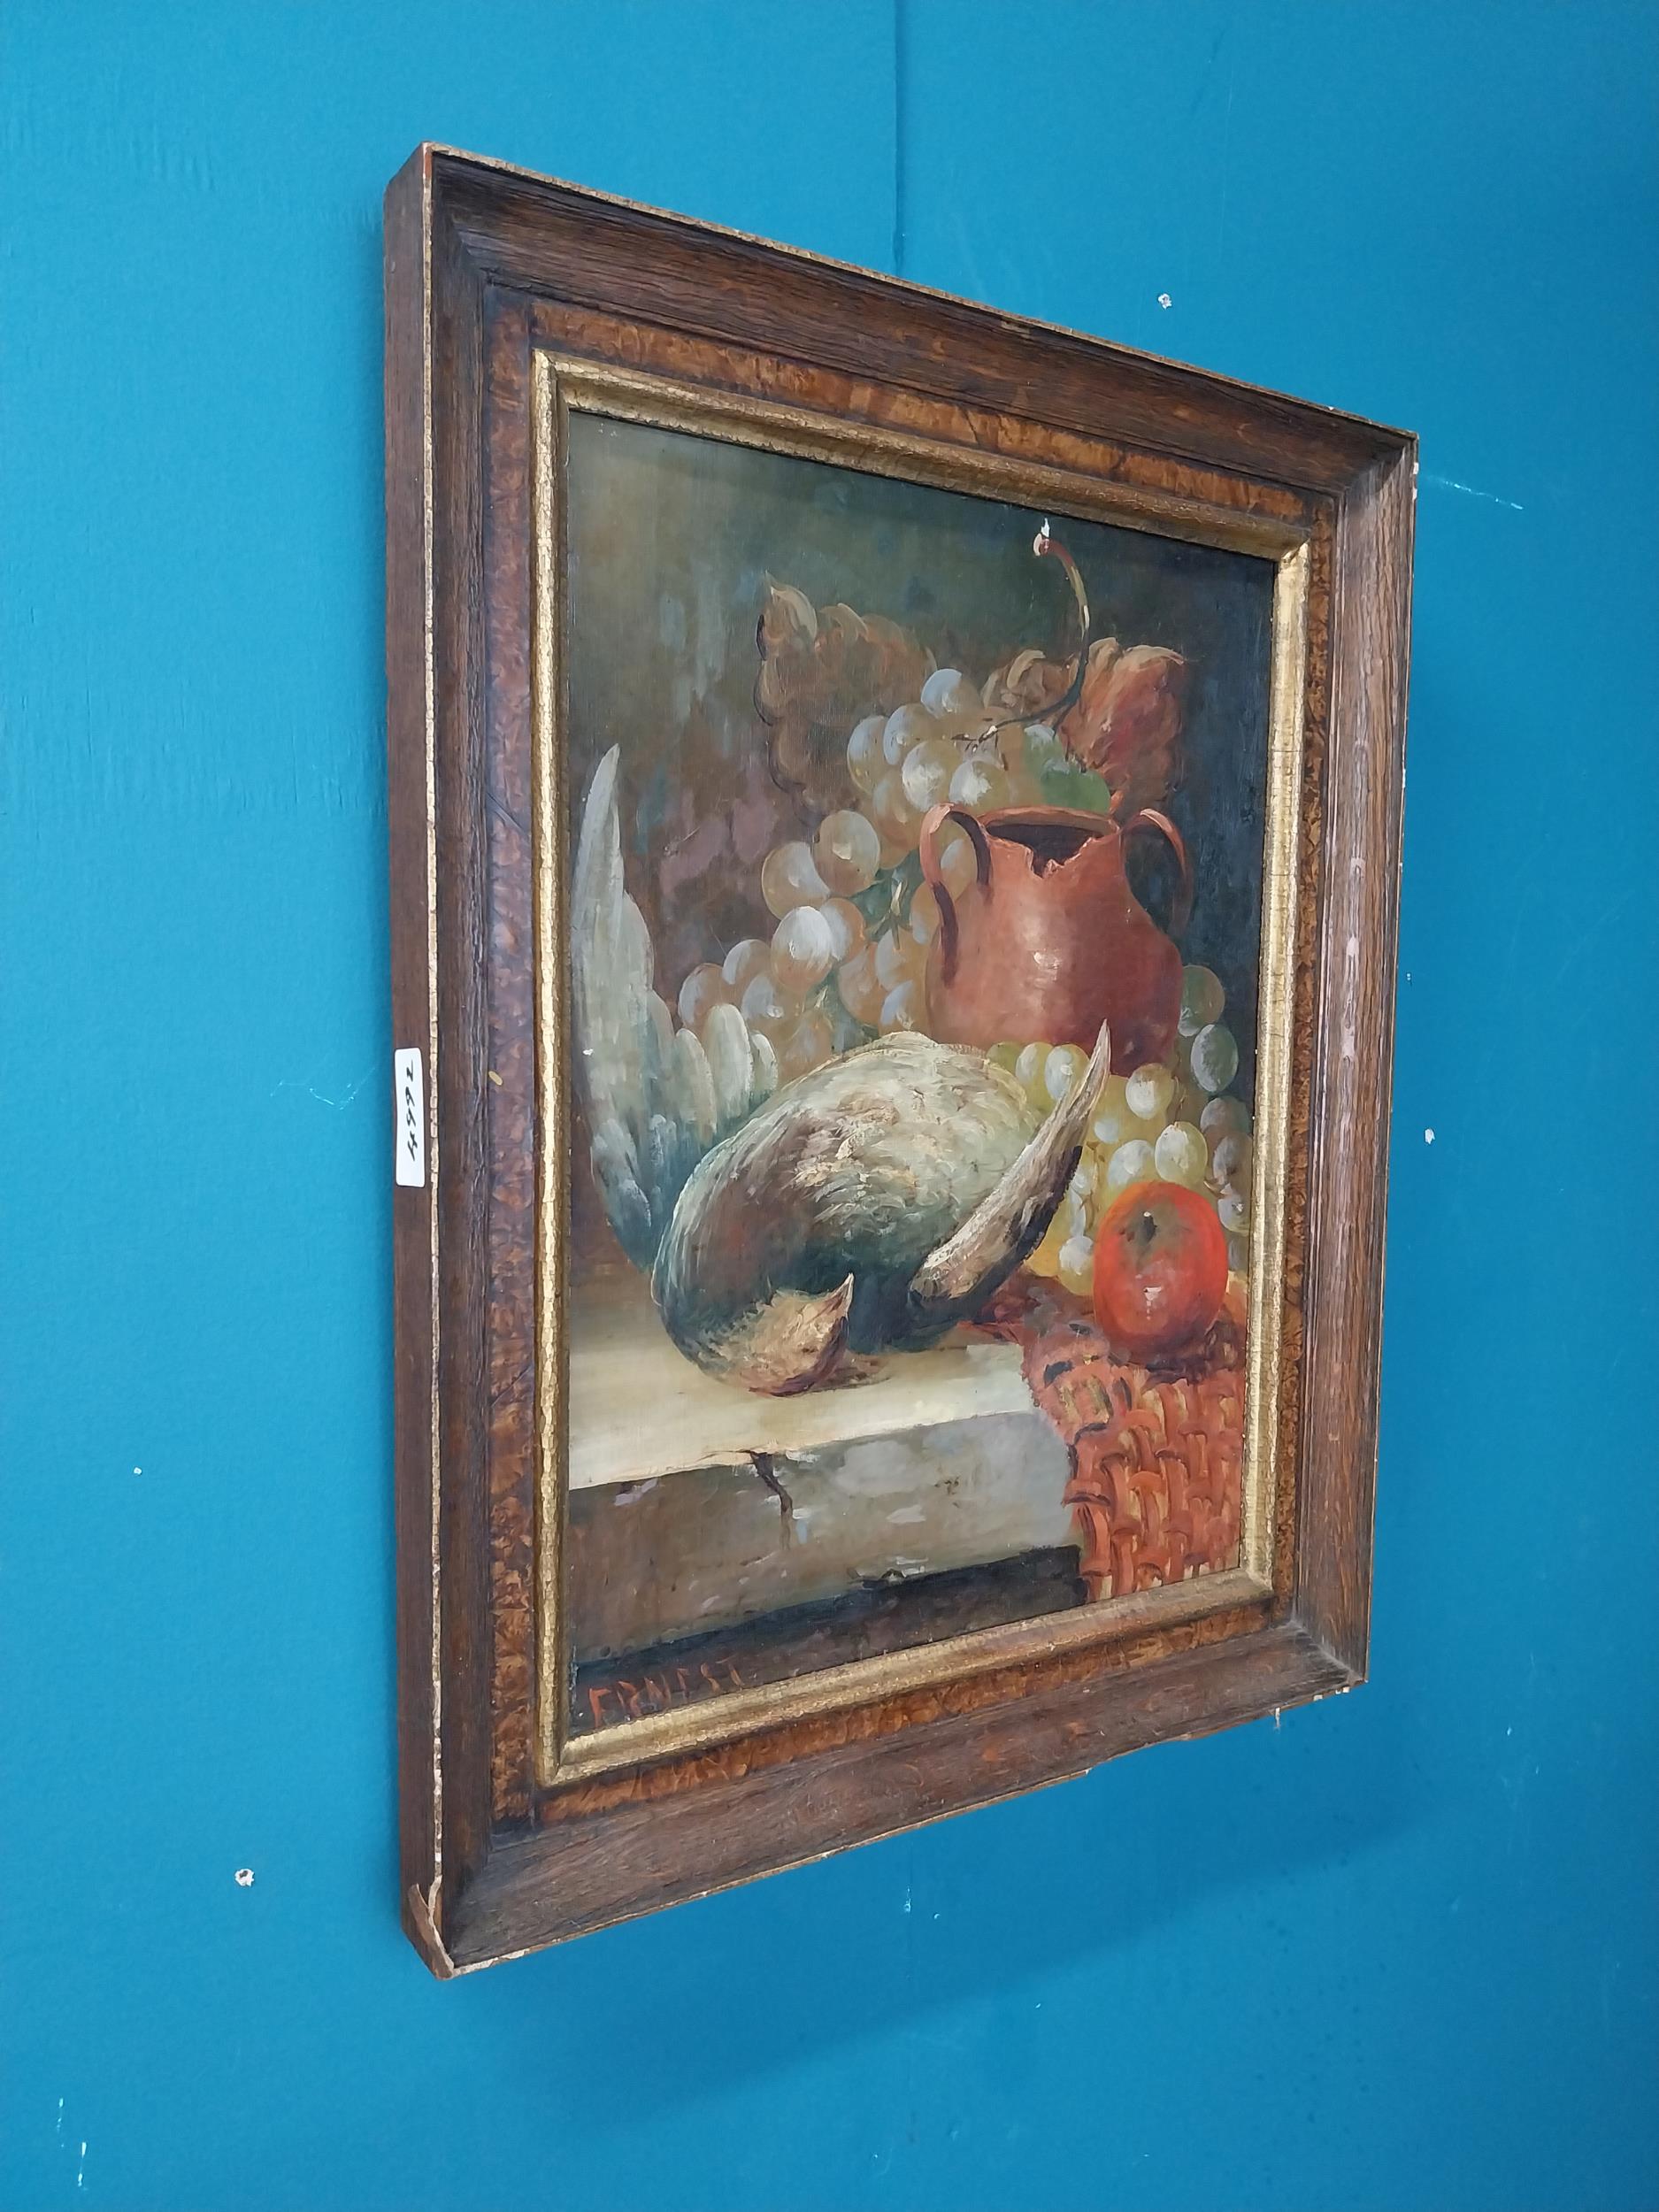 Early 20th C. oil on canvas - Still Life mounted in wooden frame {50 cm H x 40 cm W}. - Image 2 of 6